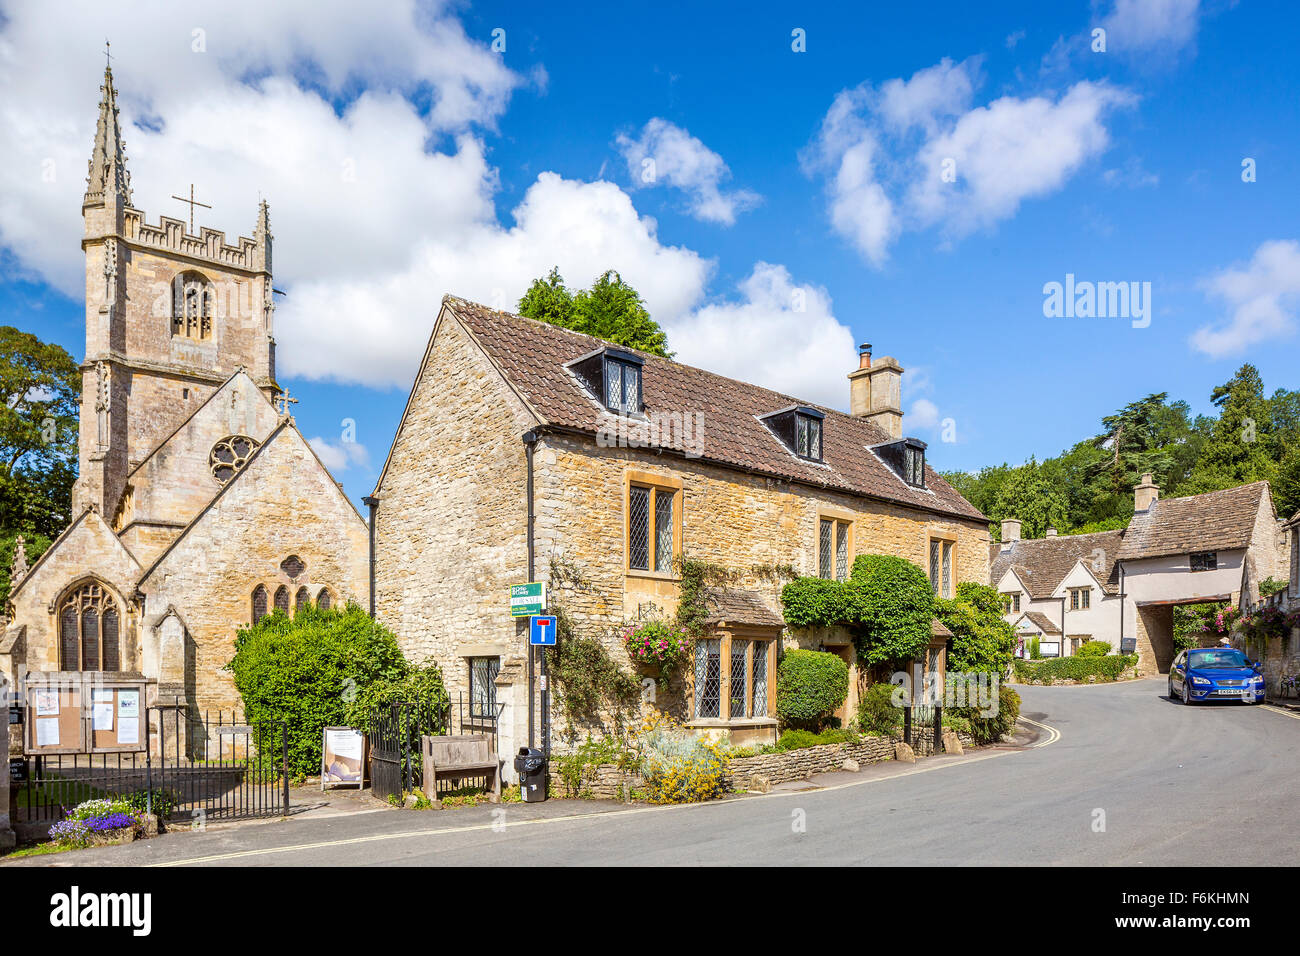 St Andrews Church, Castle Combe, Wiltshire, England, United Kingdom, Europe. Stock Photo